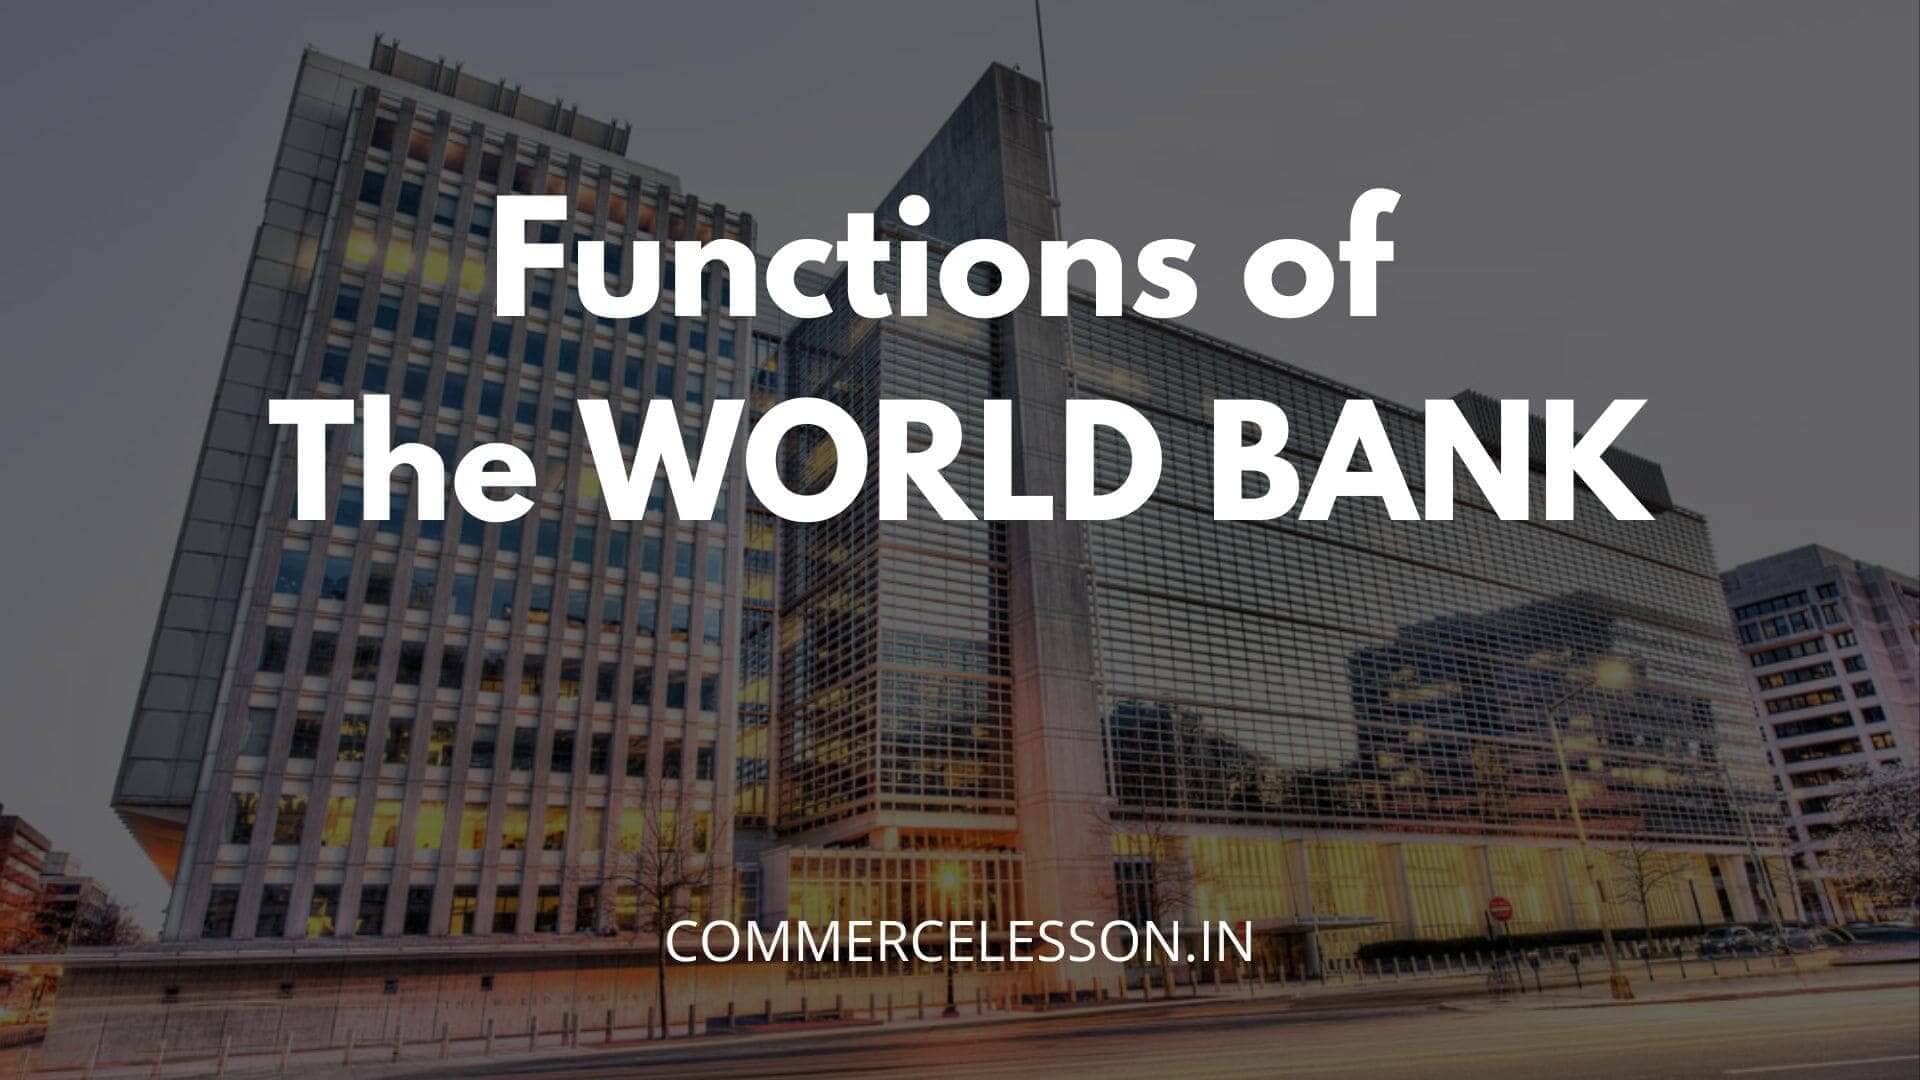 Functions of The World Bank